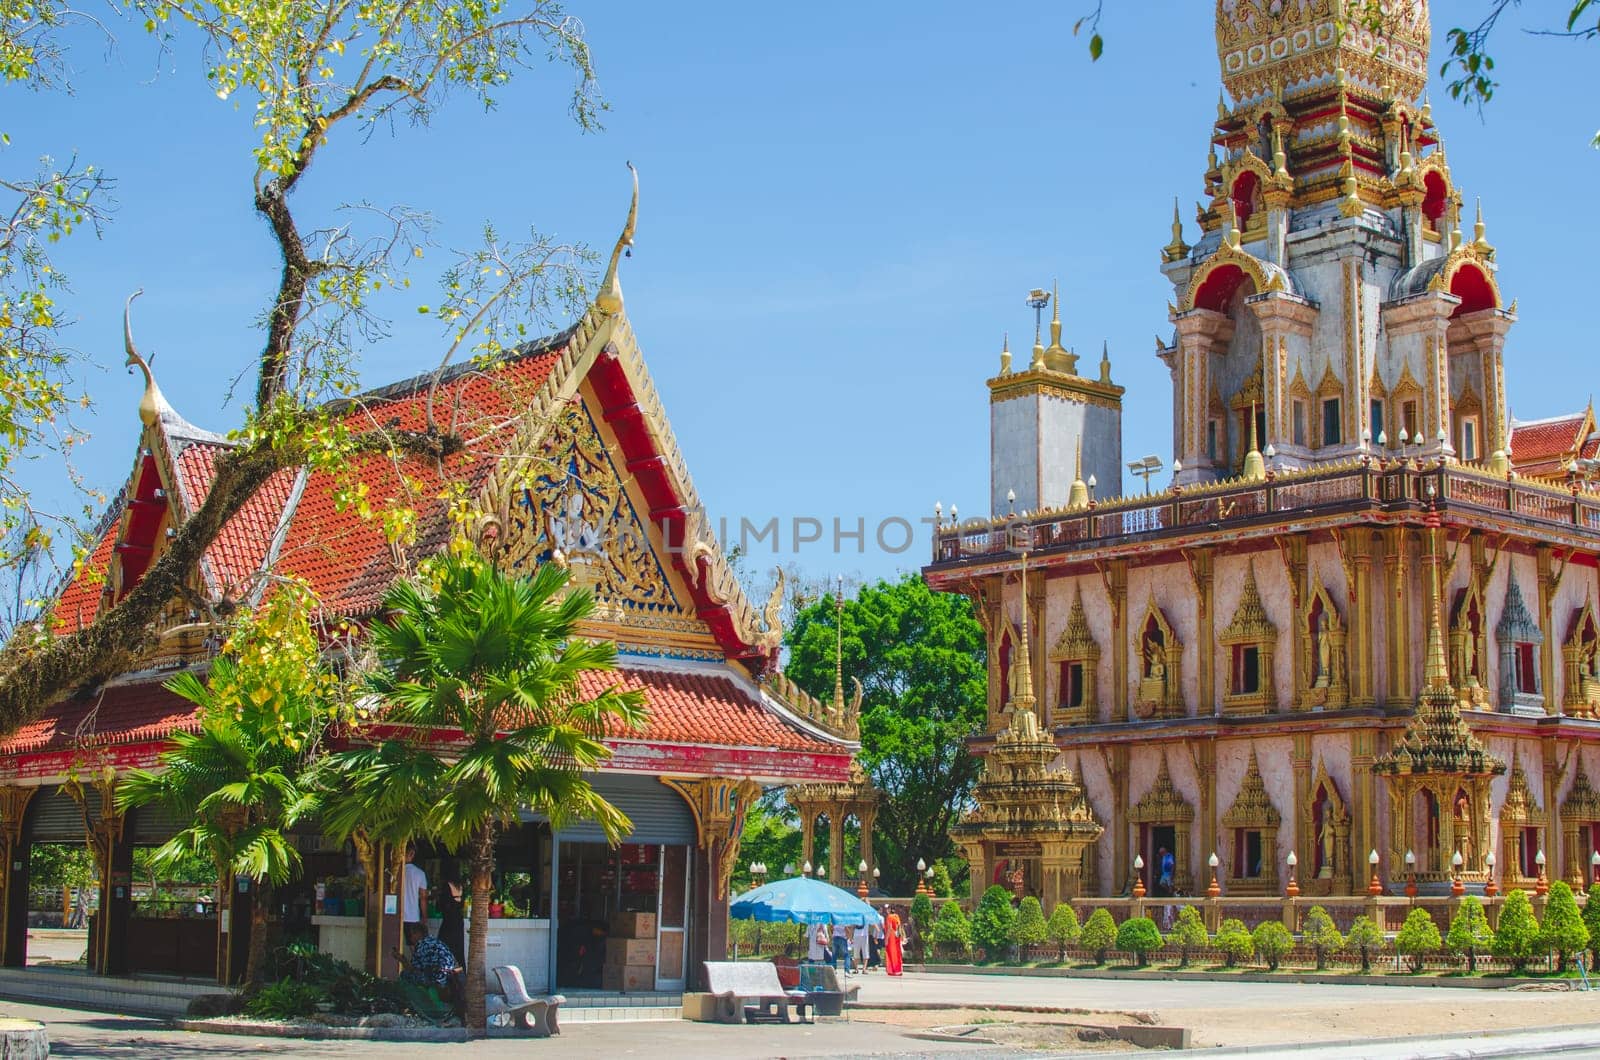 Phuket, Thailand - February 27, 2024: Detailed view of the pagoda at Phuket's largest Buddhist Temple Wat Chalong.